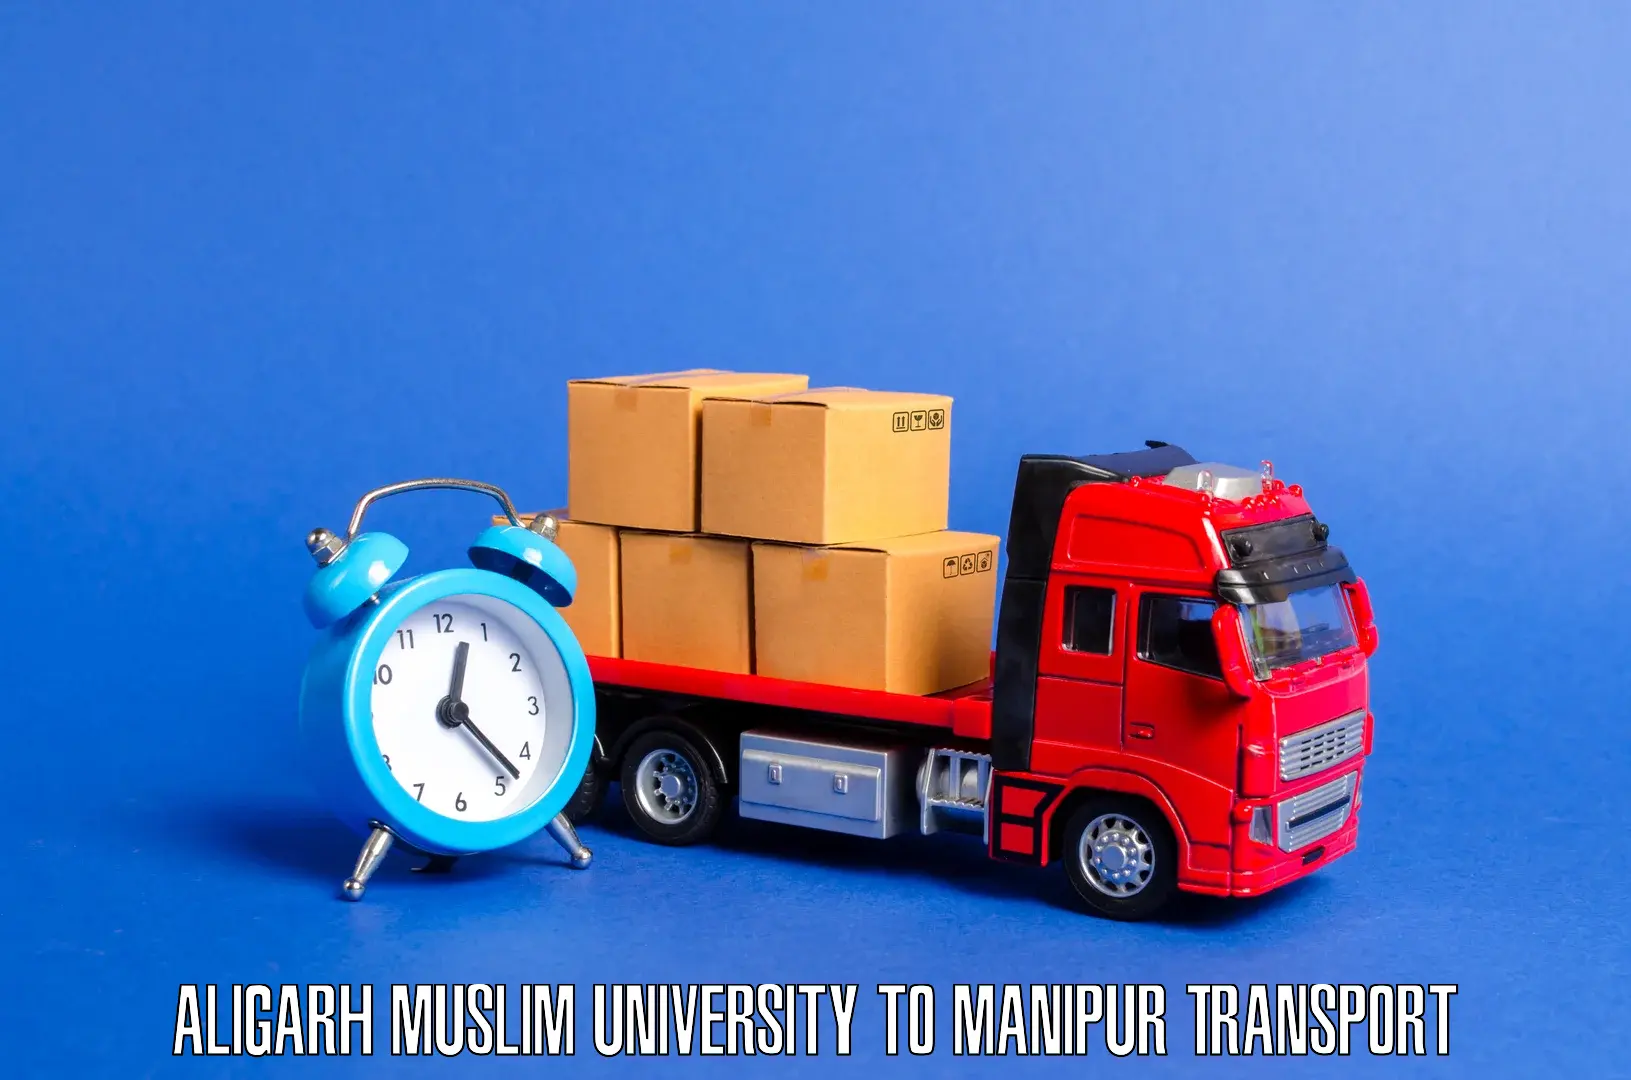 Material transport services Aligarh Muslim University to Manipur